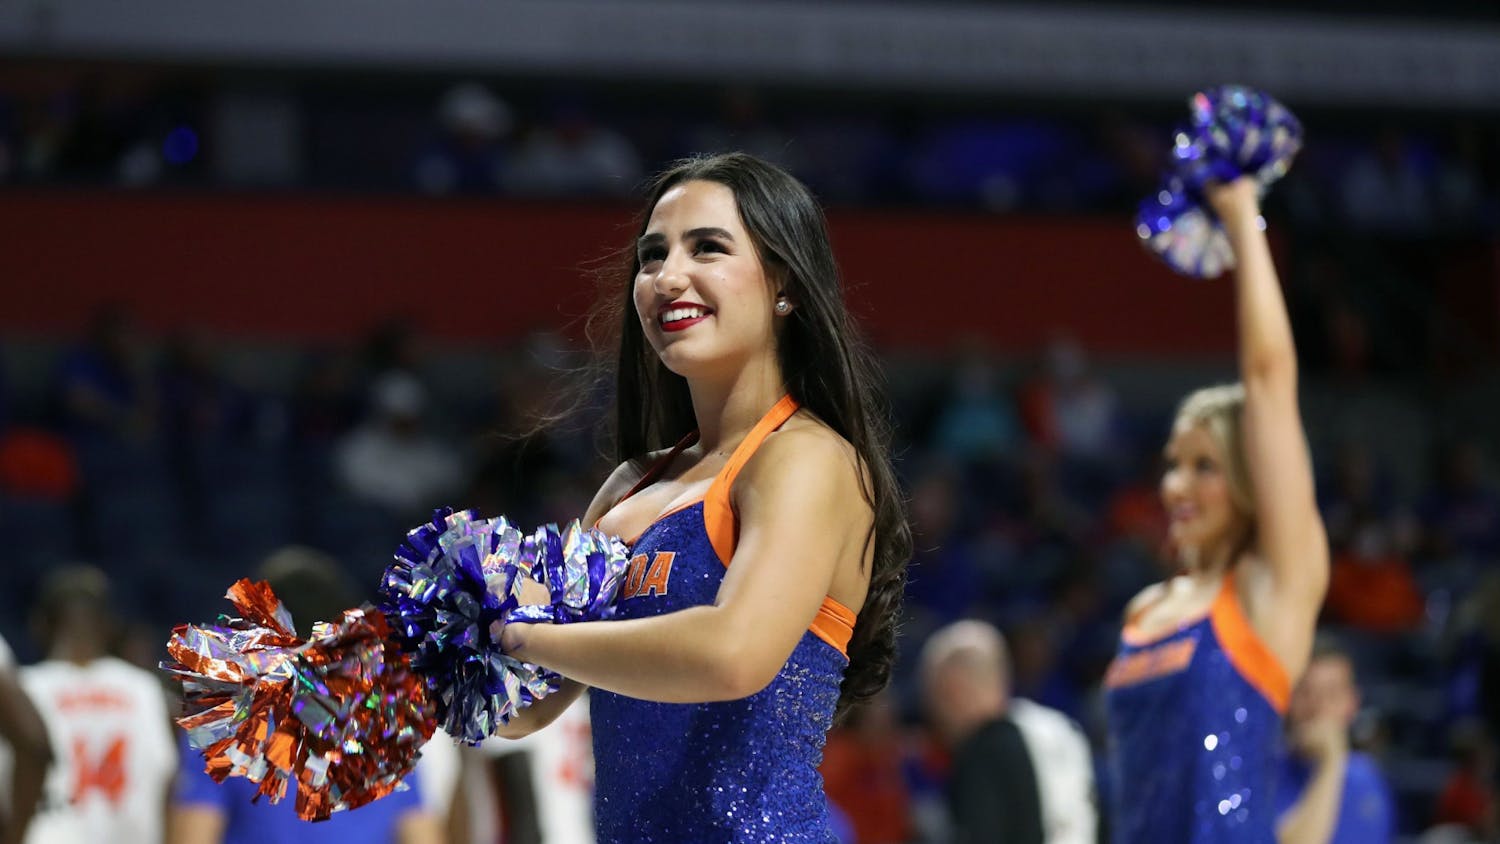 Amanda Gonzalez, a Florida Dazzler, performs a routine with the rest of the team.